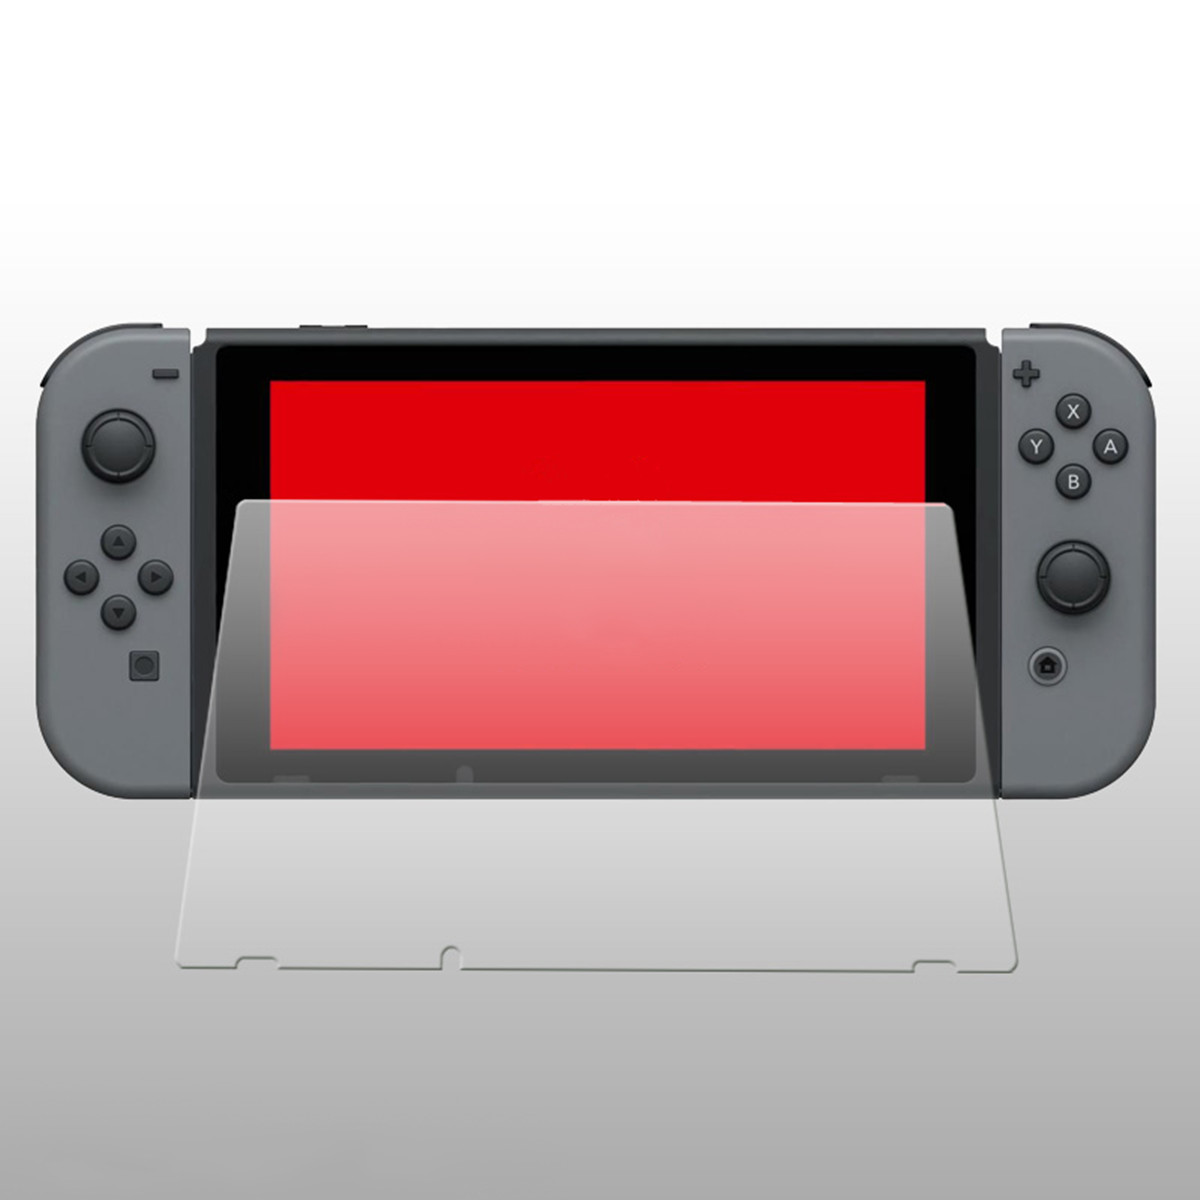 PET-Screen-Protector-Film-Shield-Guard-Transparent-For-Nintendo-Switch-Game-Console-1540489-10